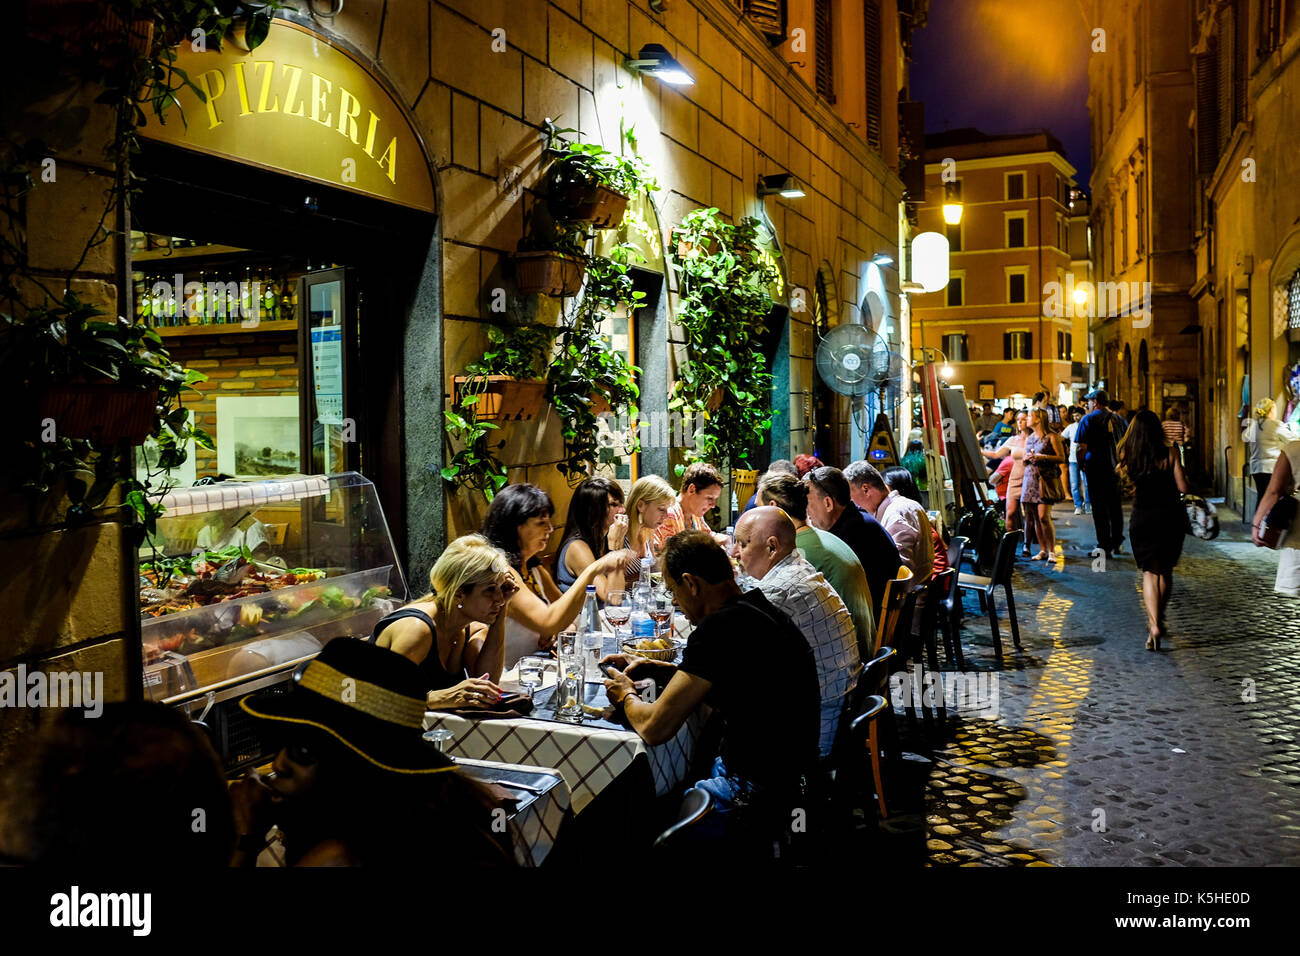 People and tourists eat at a pizzeria in Rome, Italy on July 4, 2016. Stock Photo